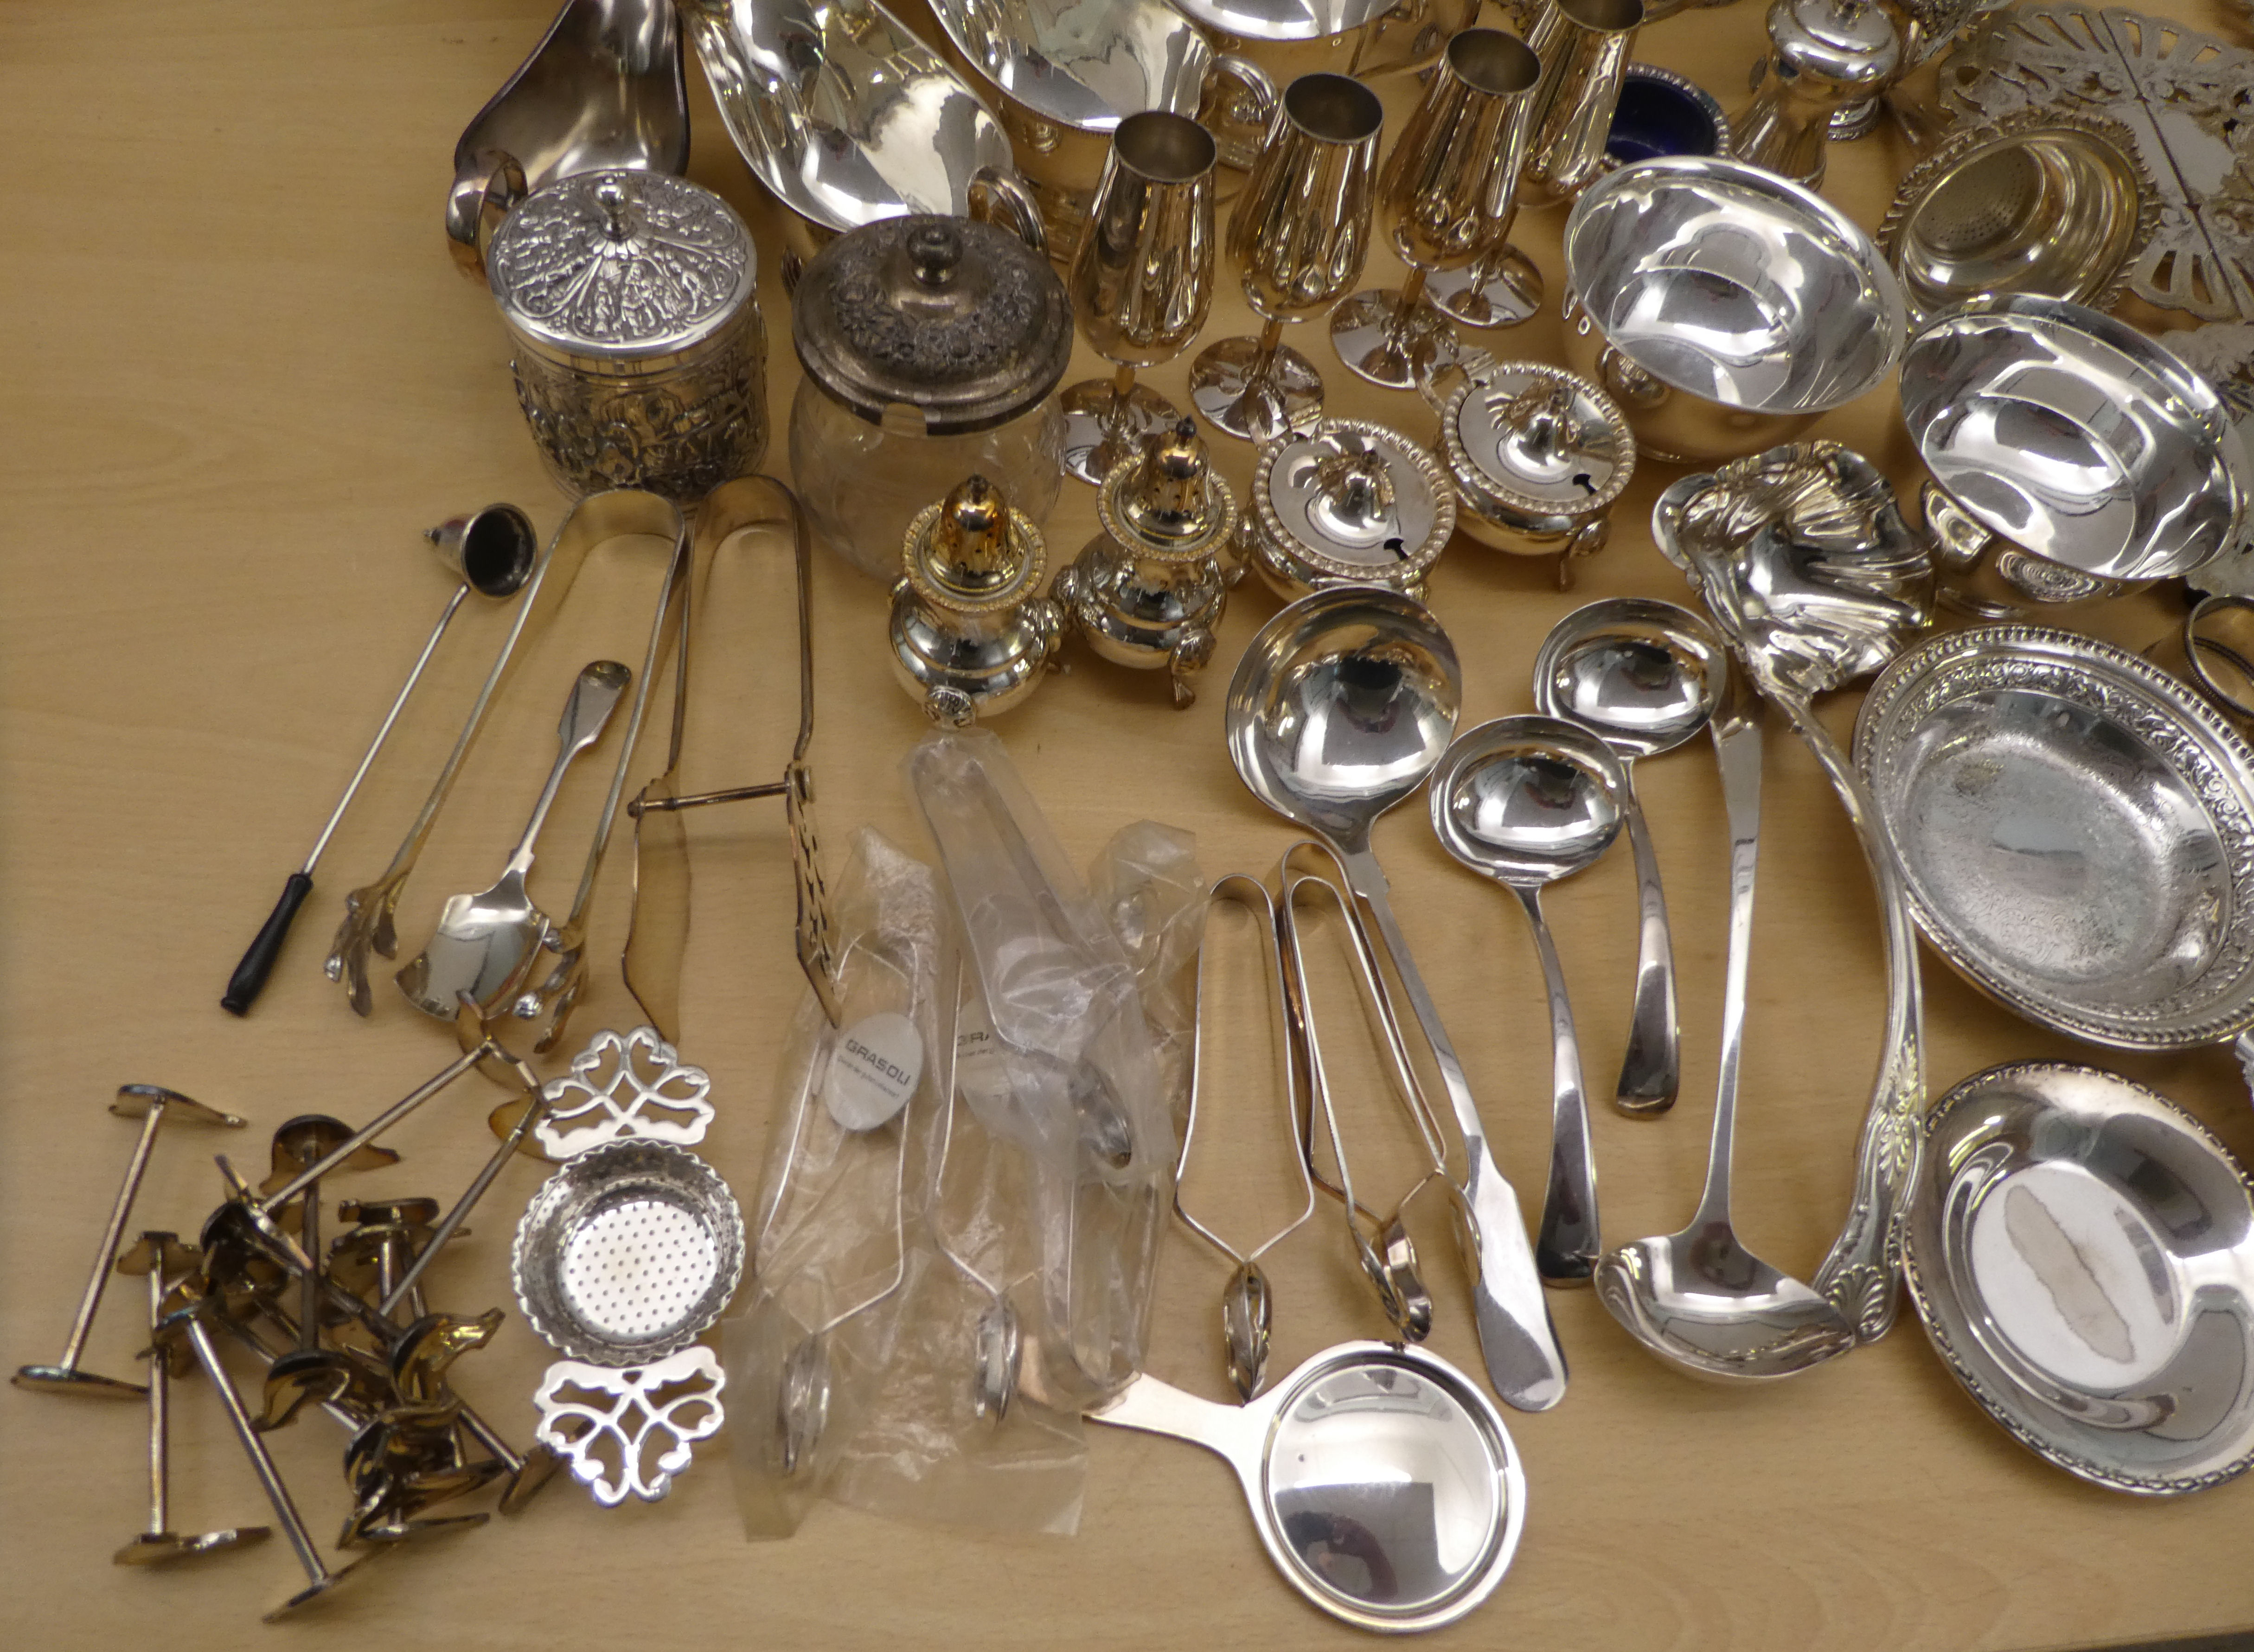 Silver plated tableware, mainly condiments pots and sauce boats - Image 4 of 7